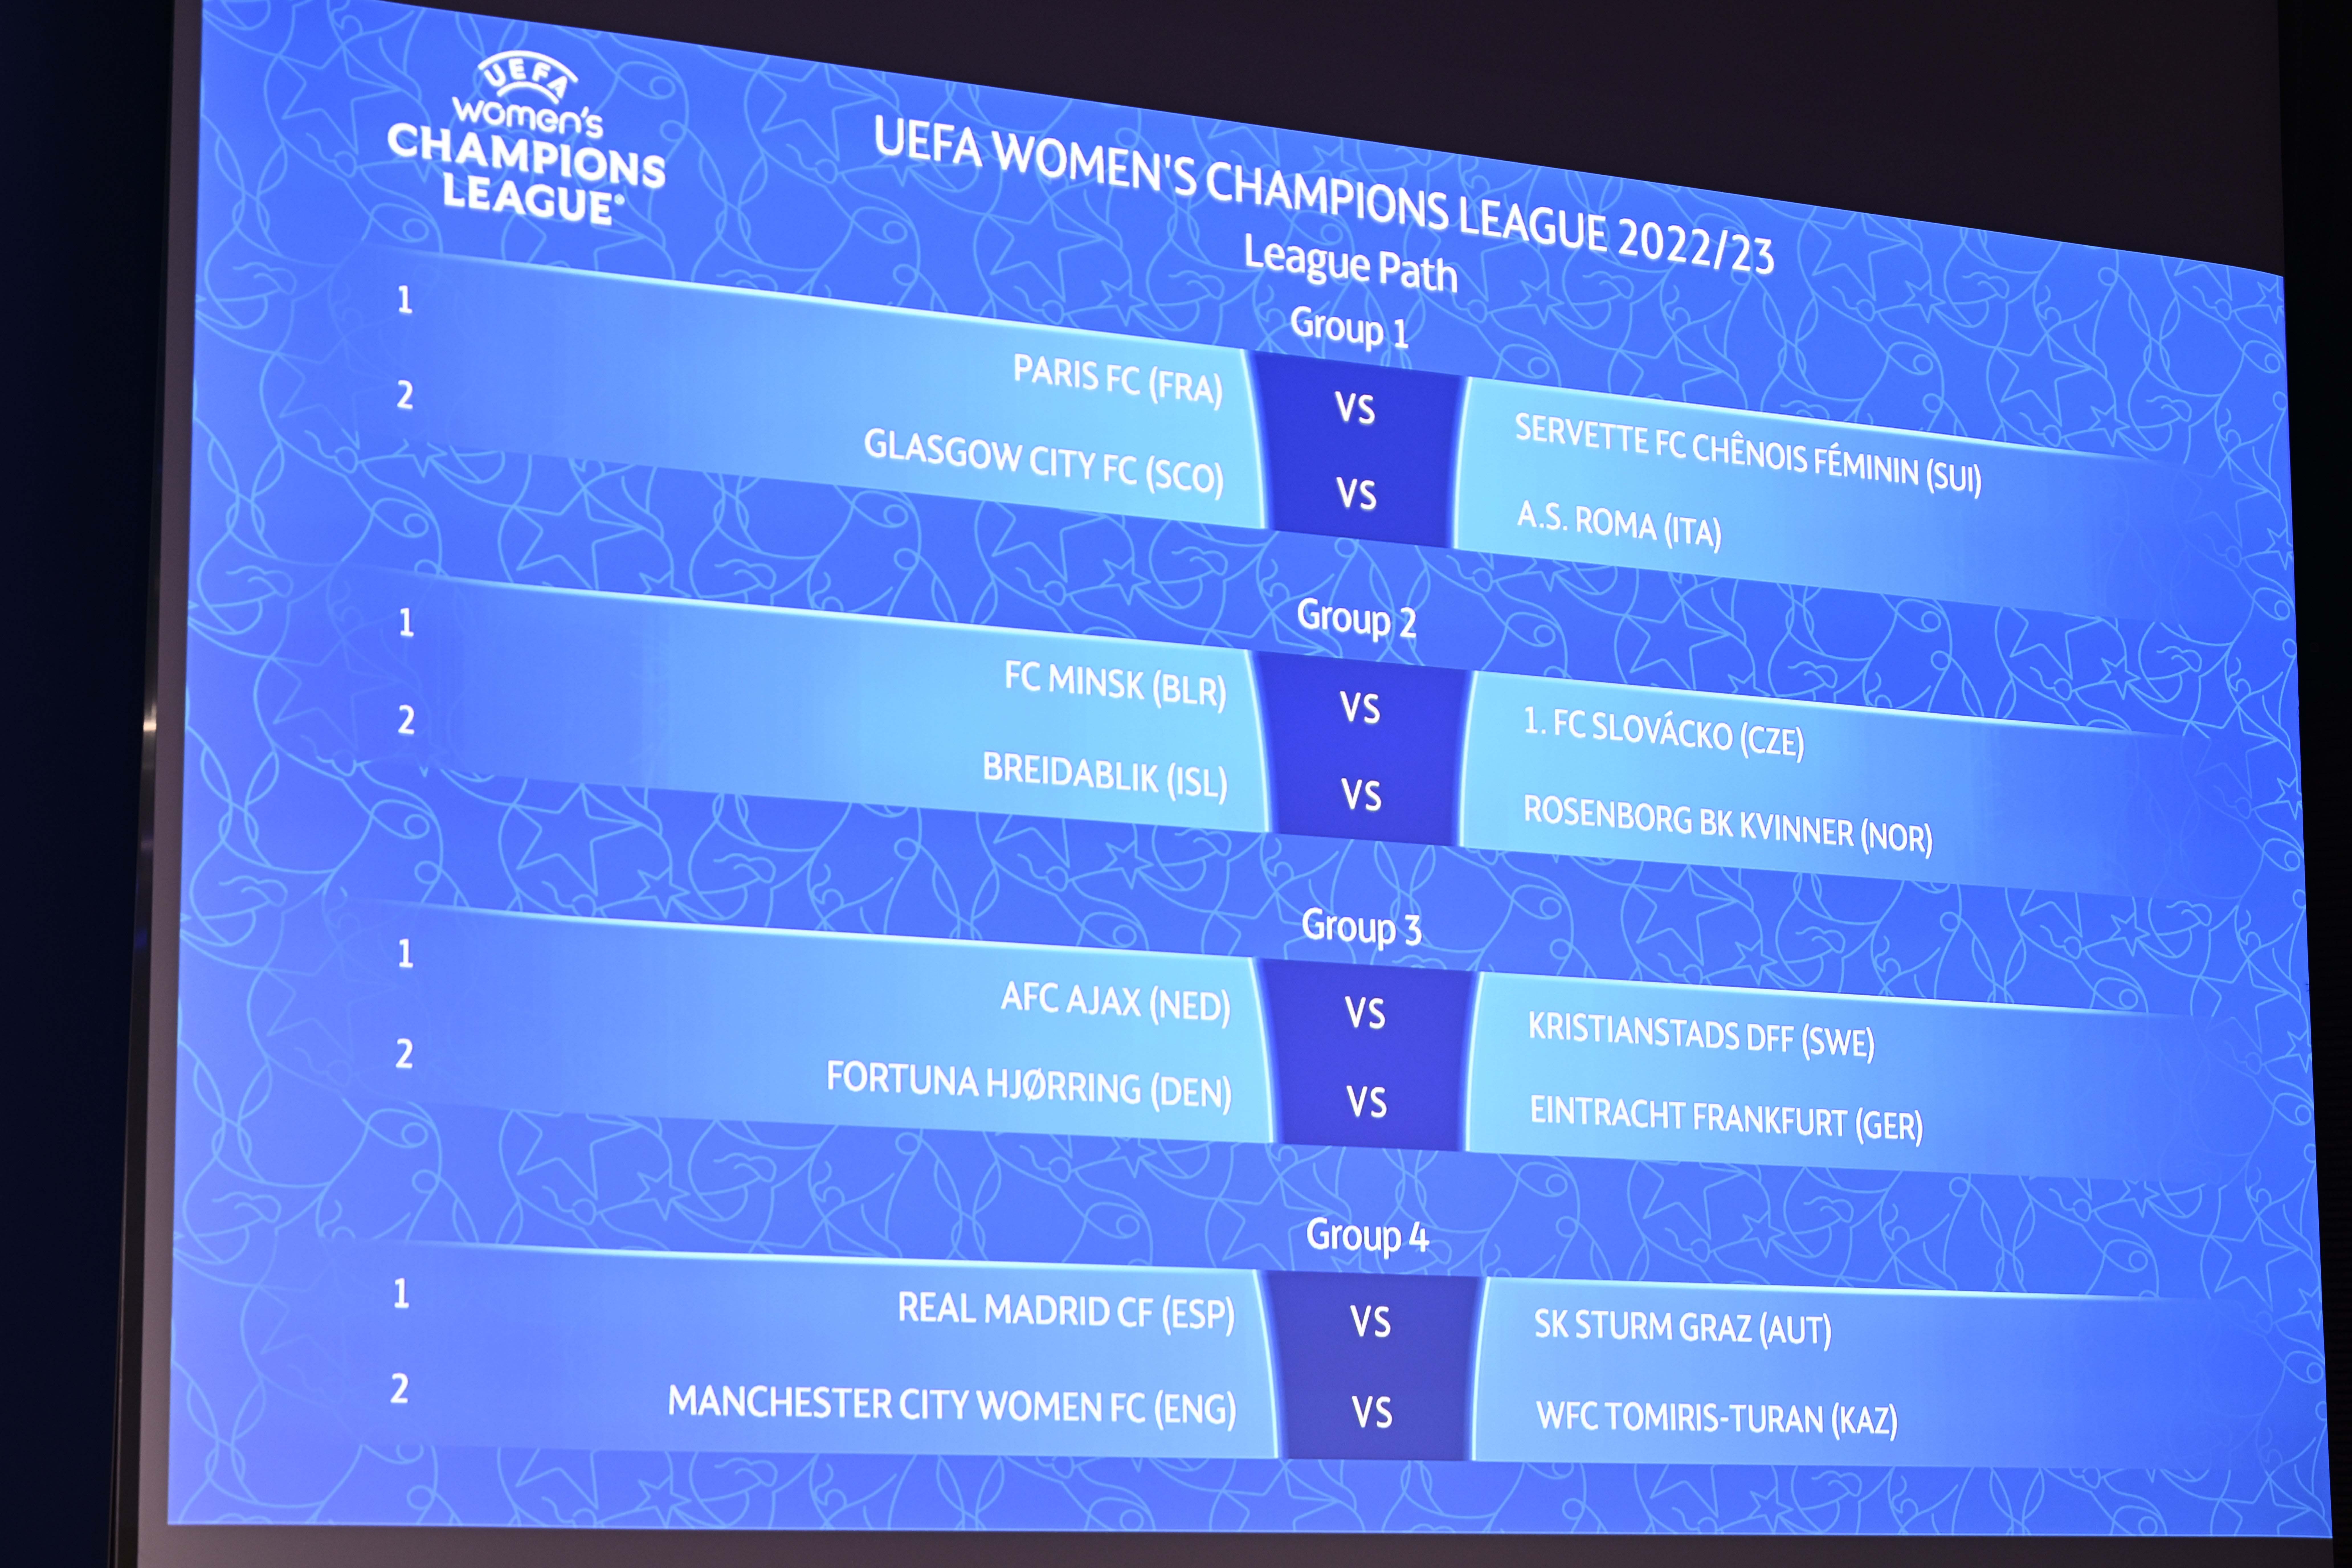 The result of the UEFA Women's Champions League 2022/23 Preliminary Round and Round 1 Draws is displayed on the screen at the UEFA headquarters, The House of European Football, on June 24, 2022, in Nyon, Switzerland. (Photo by Kristian Skeie - UEFA/UEFA via Getty Images)